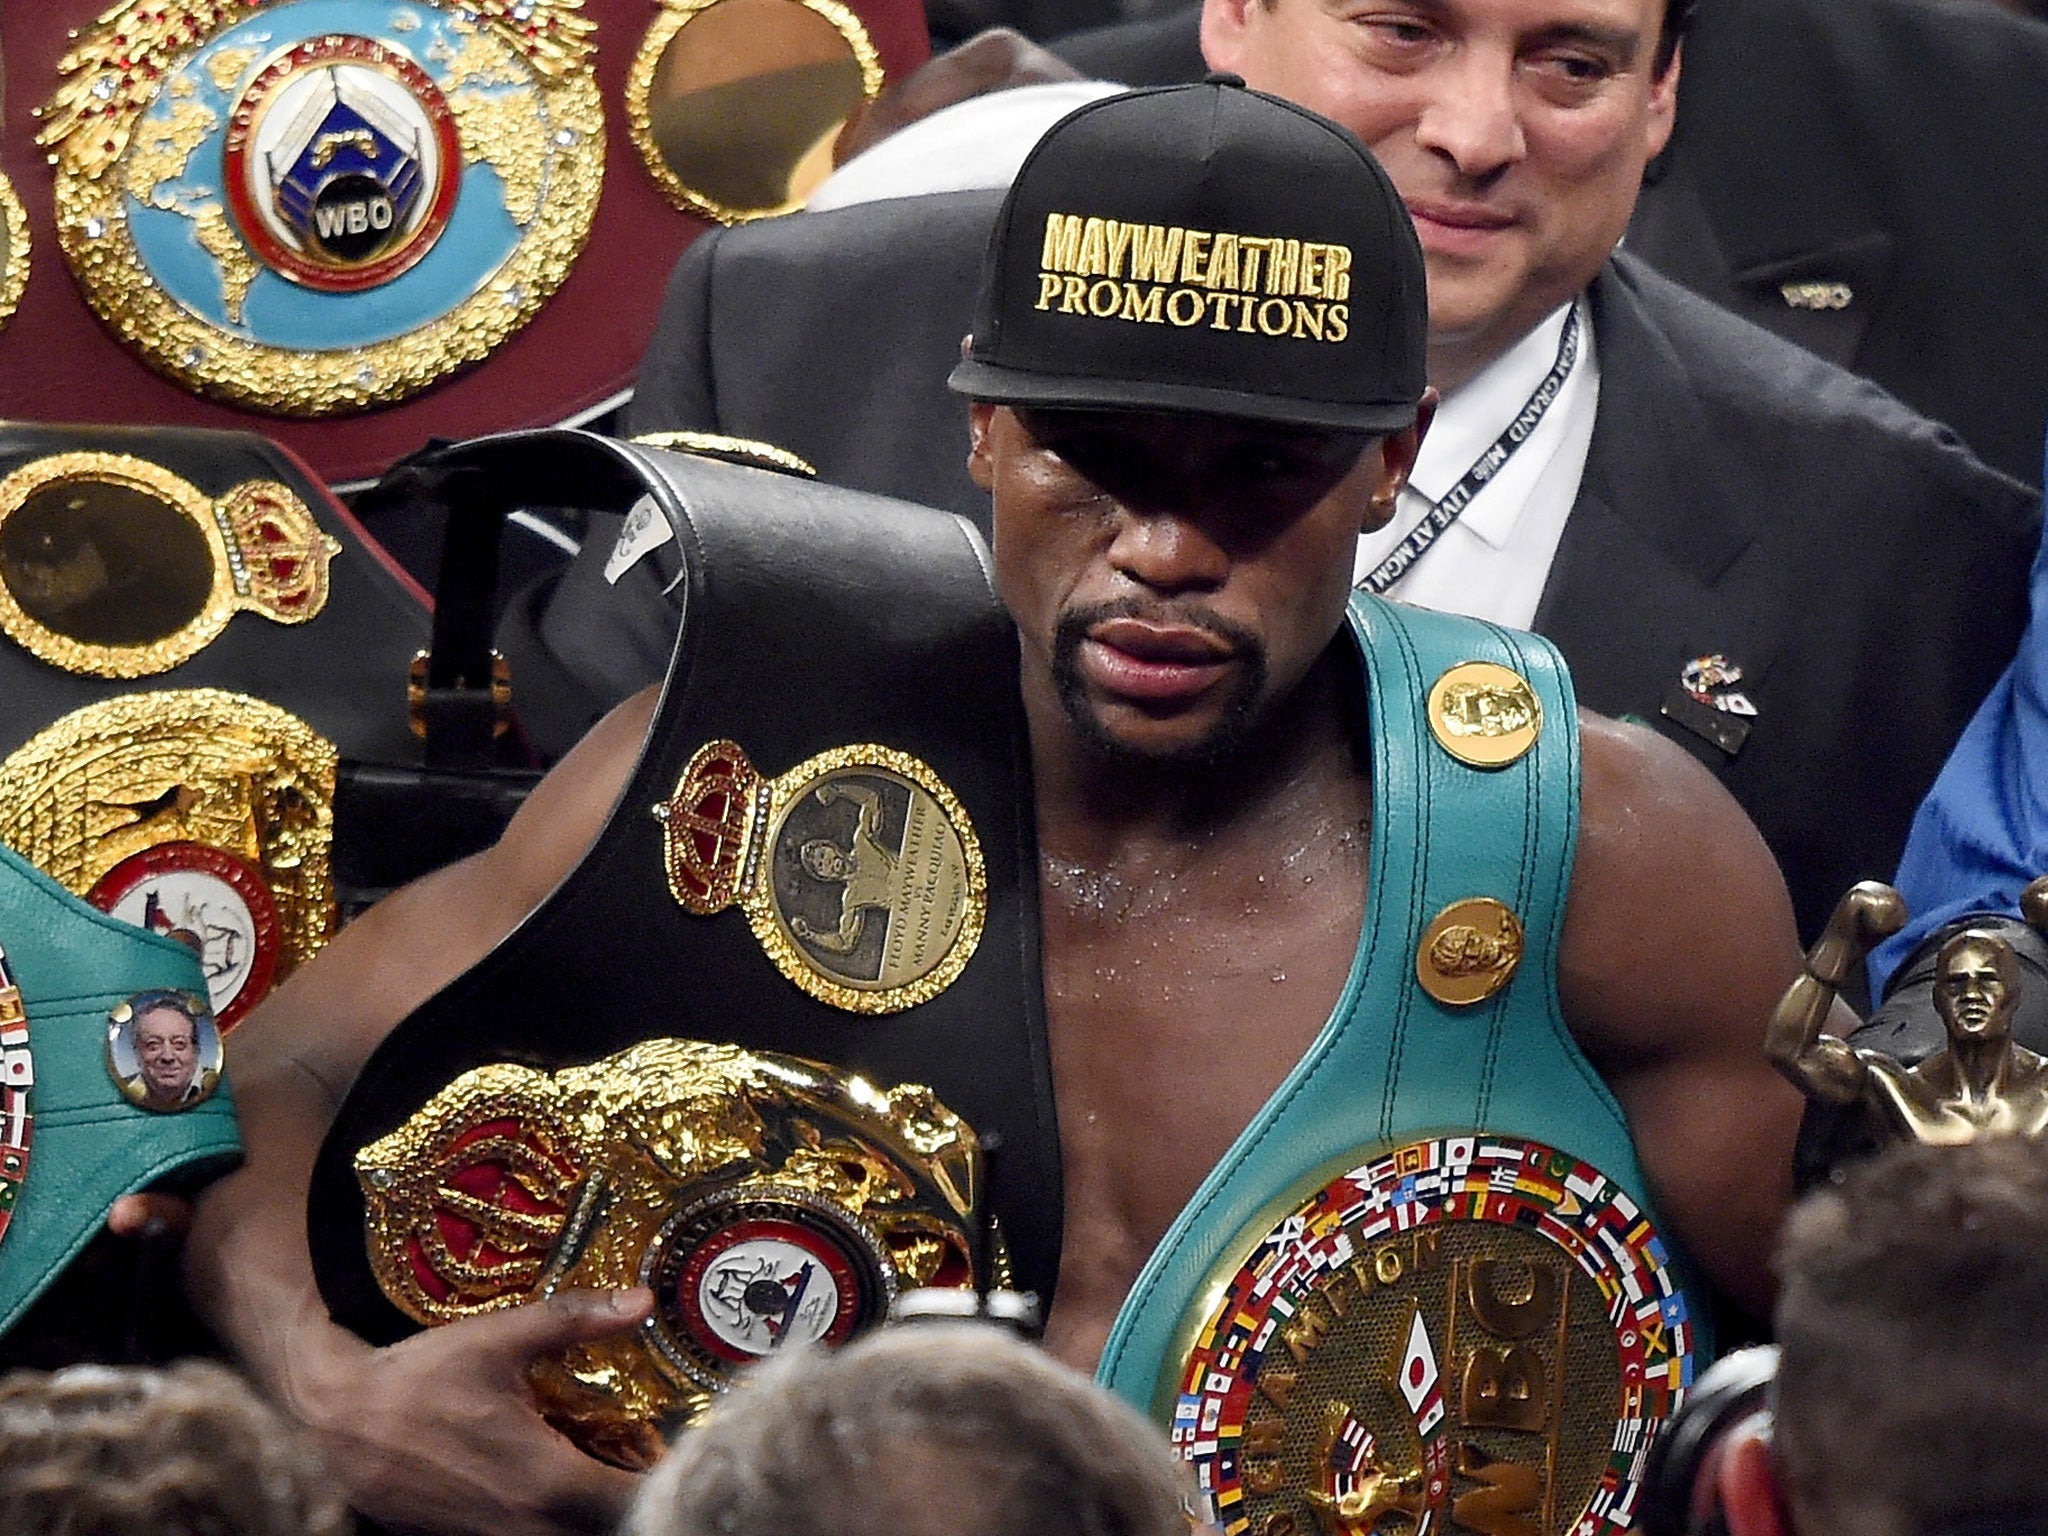 Floyd Mayweather will relinquish his five world titles after beating Manny Pacquiao